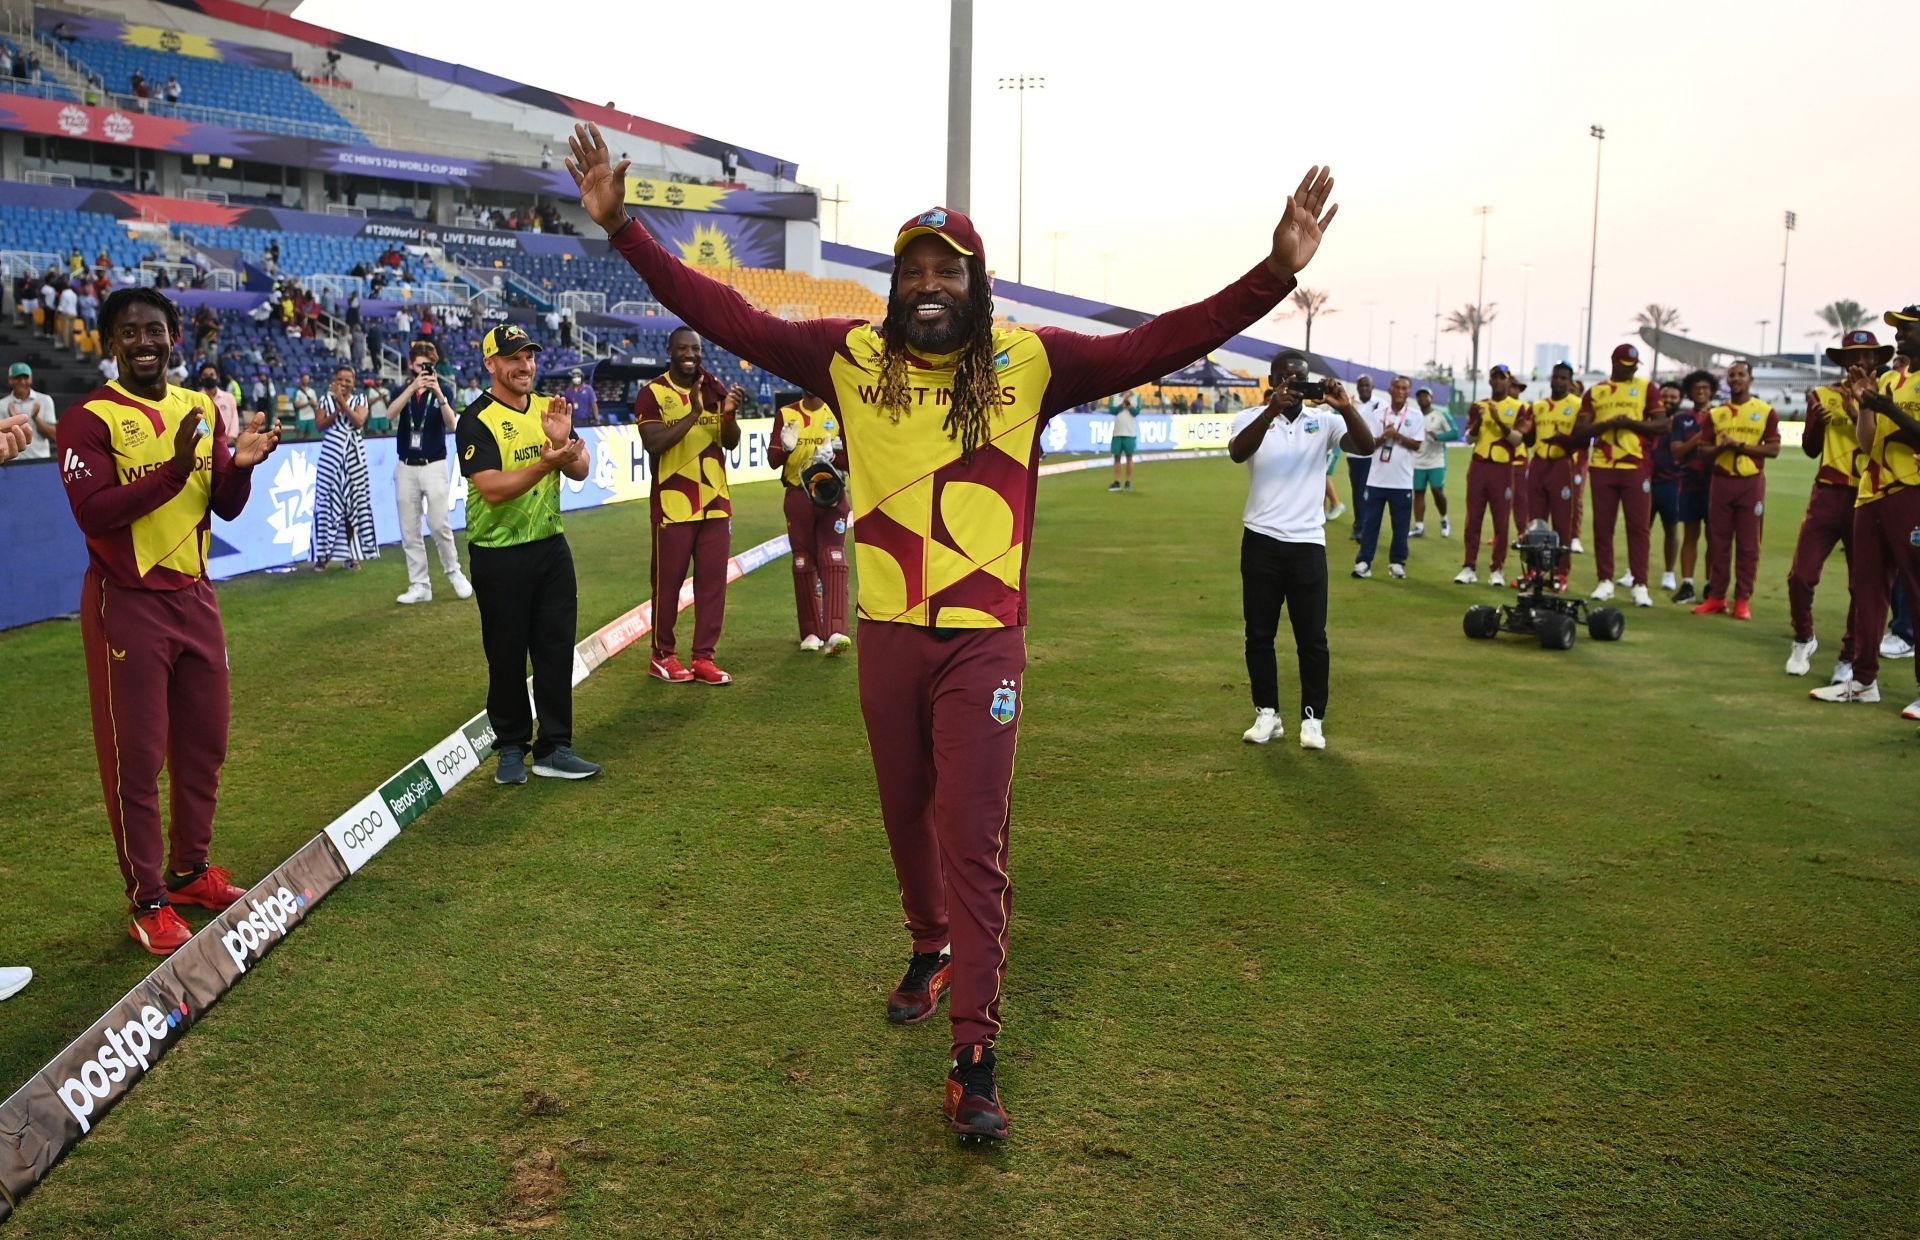 Chris Gayle played his last World Cup game on Saturday [Image- Twitter]